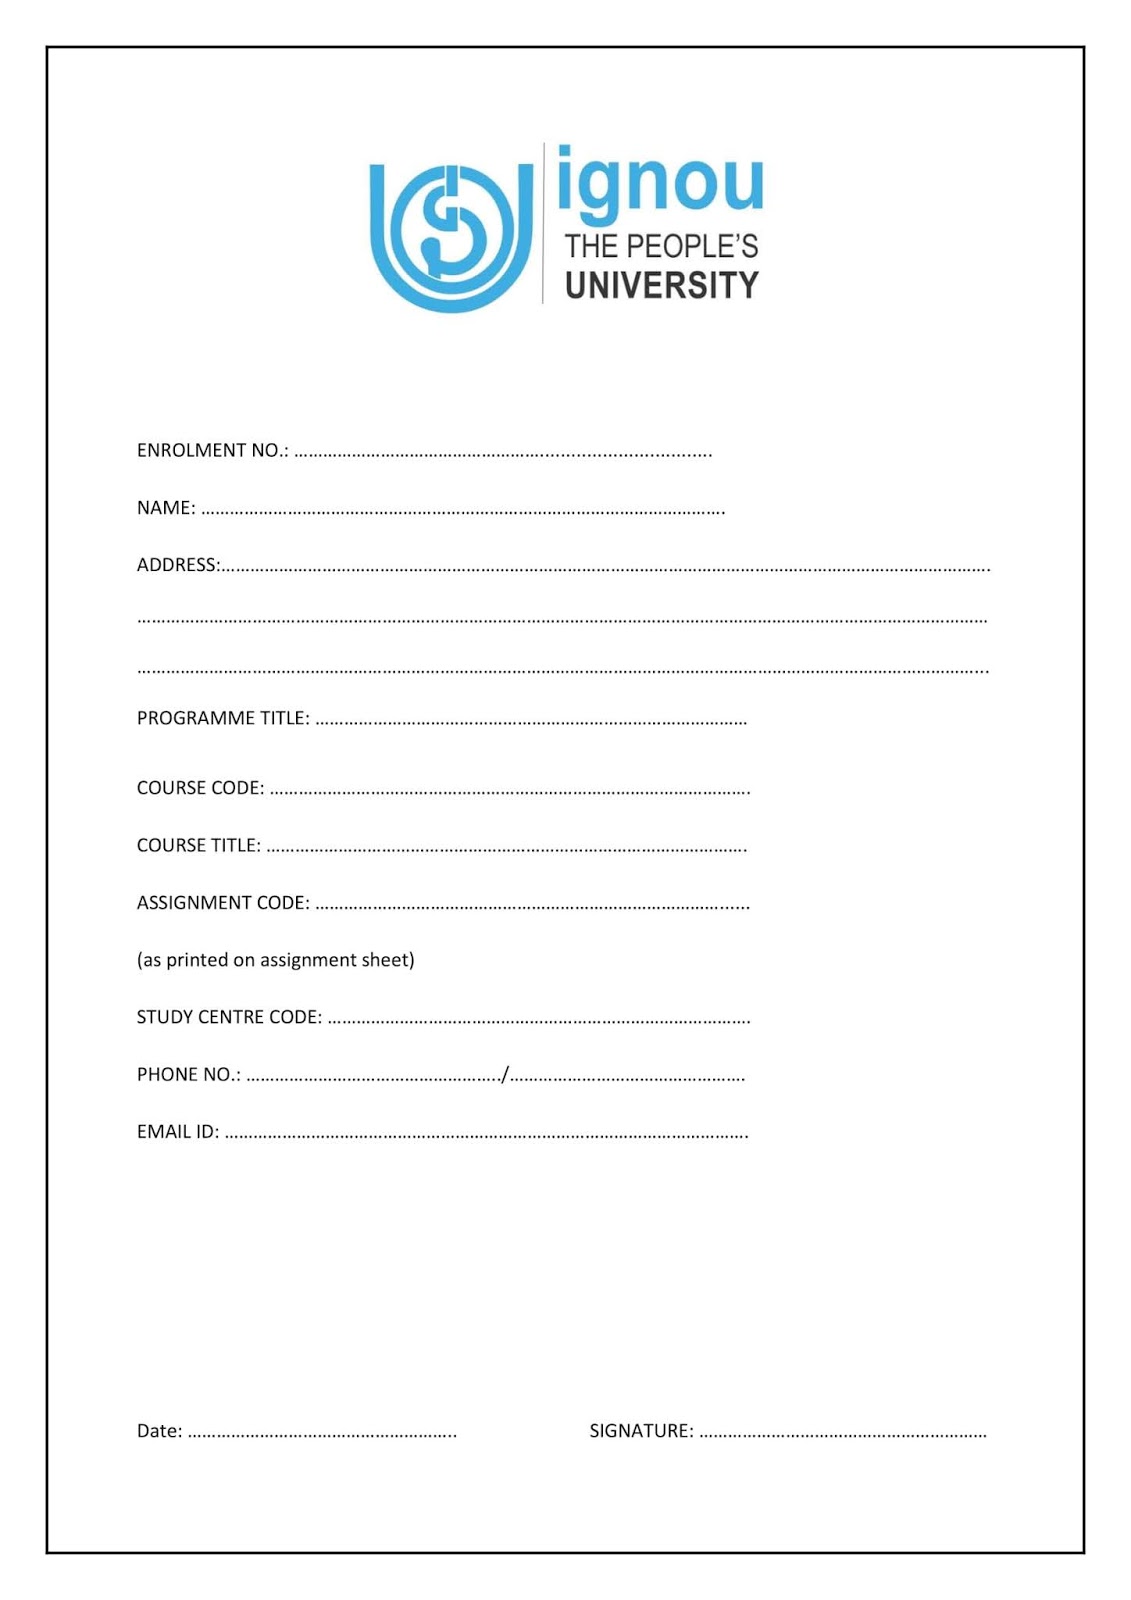 ignou mba new assignment 2021